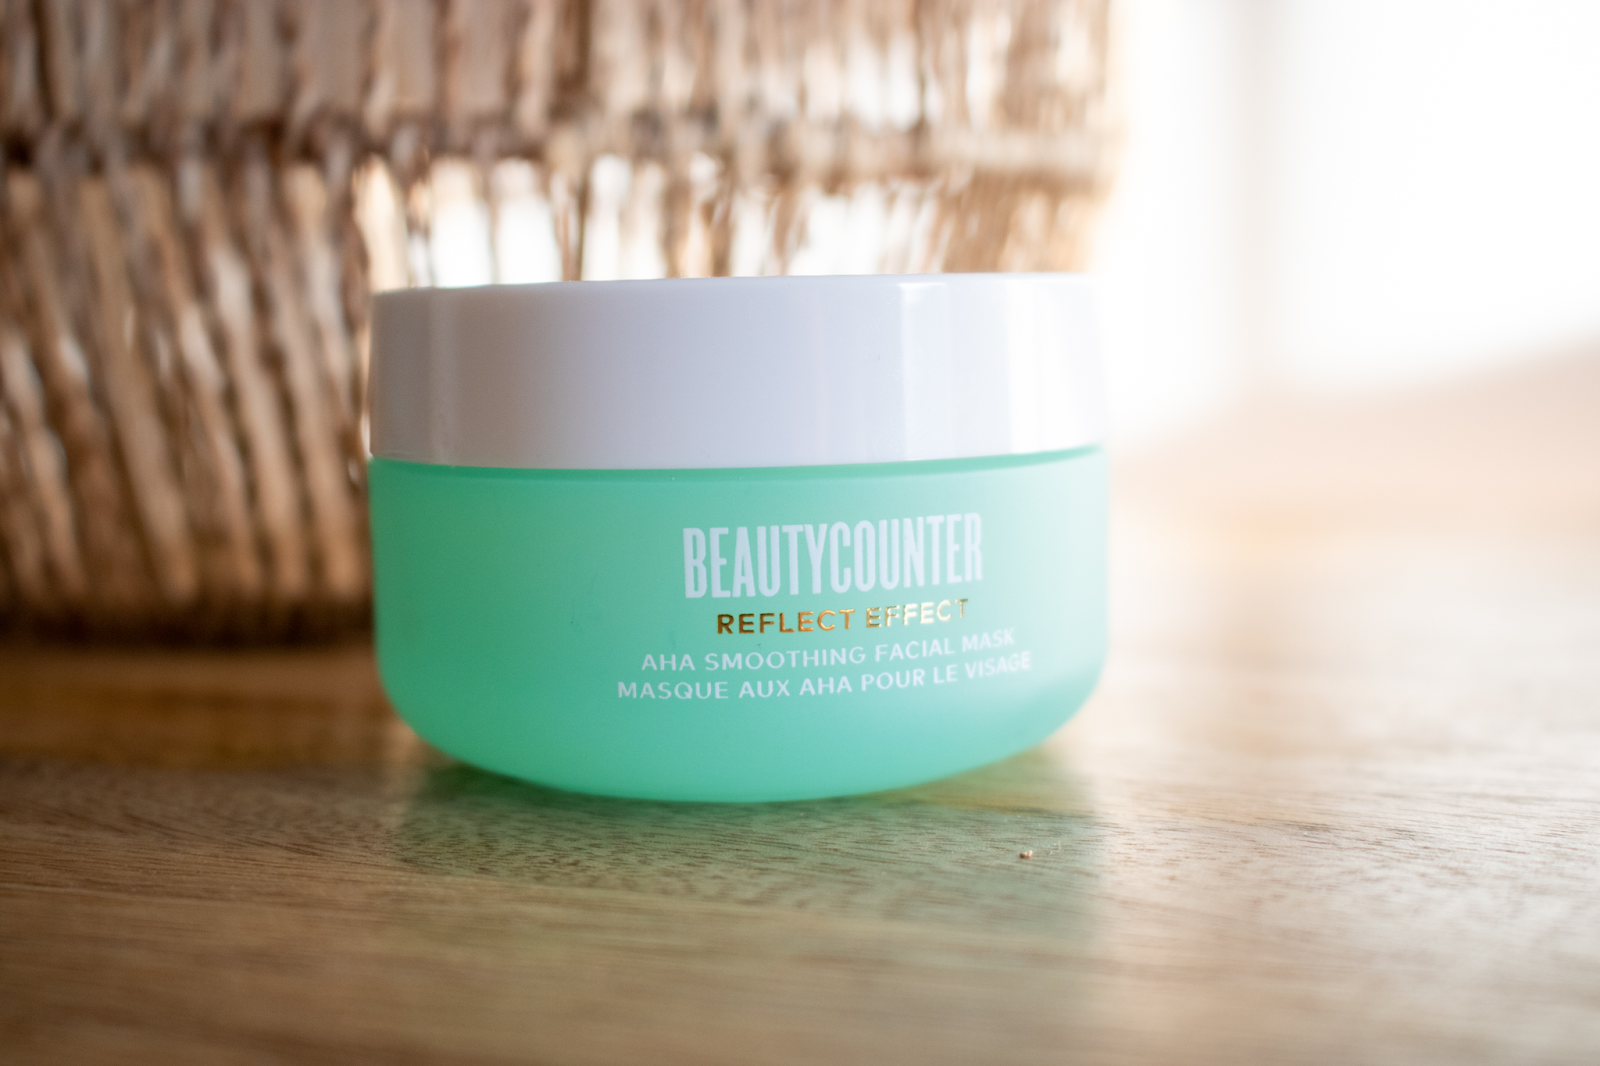 The Reflect Effect mask is packed in antioxidants, which makes it such a powerful 10 minute mask